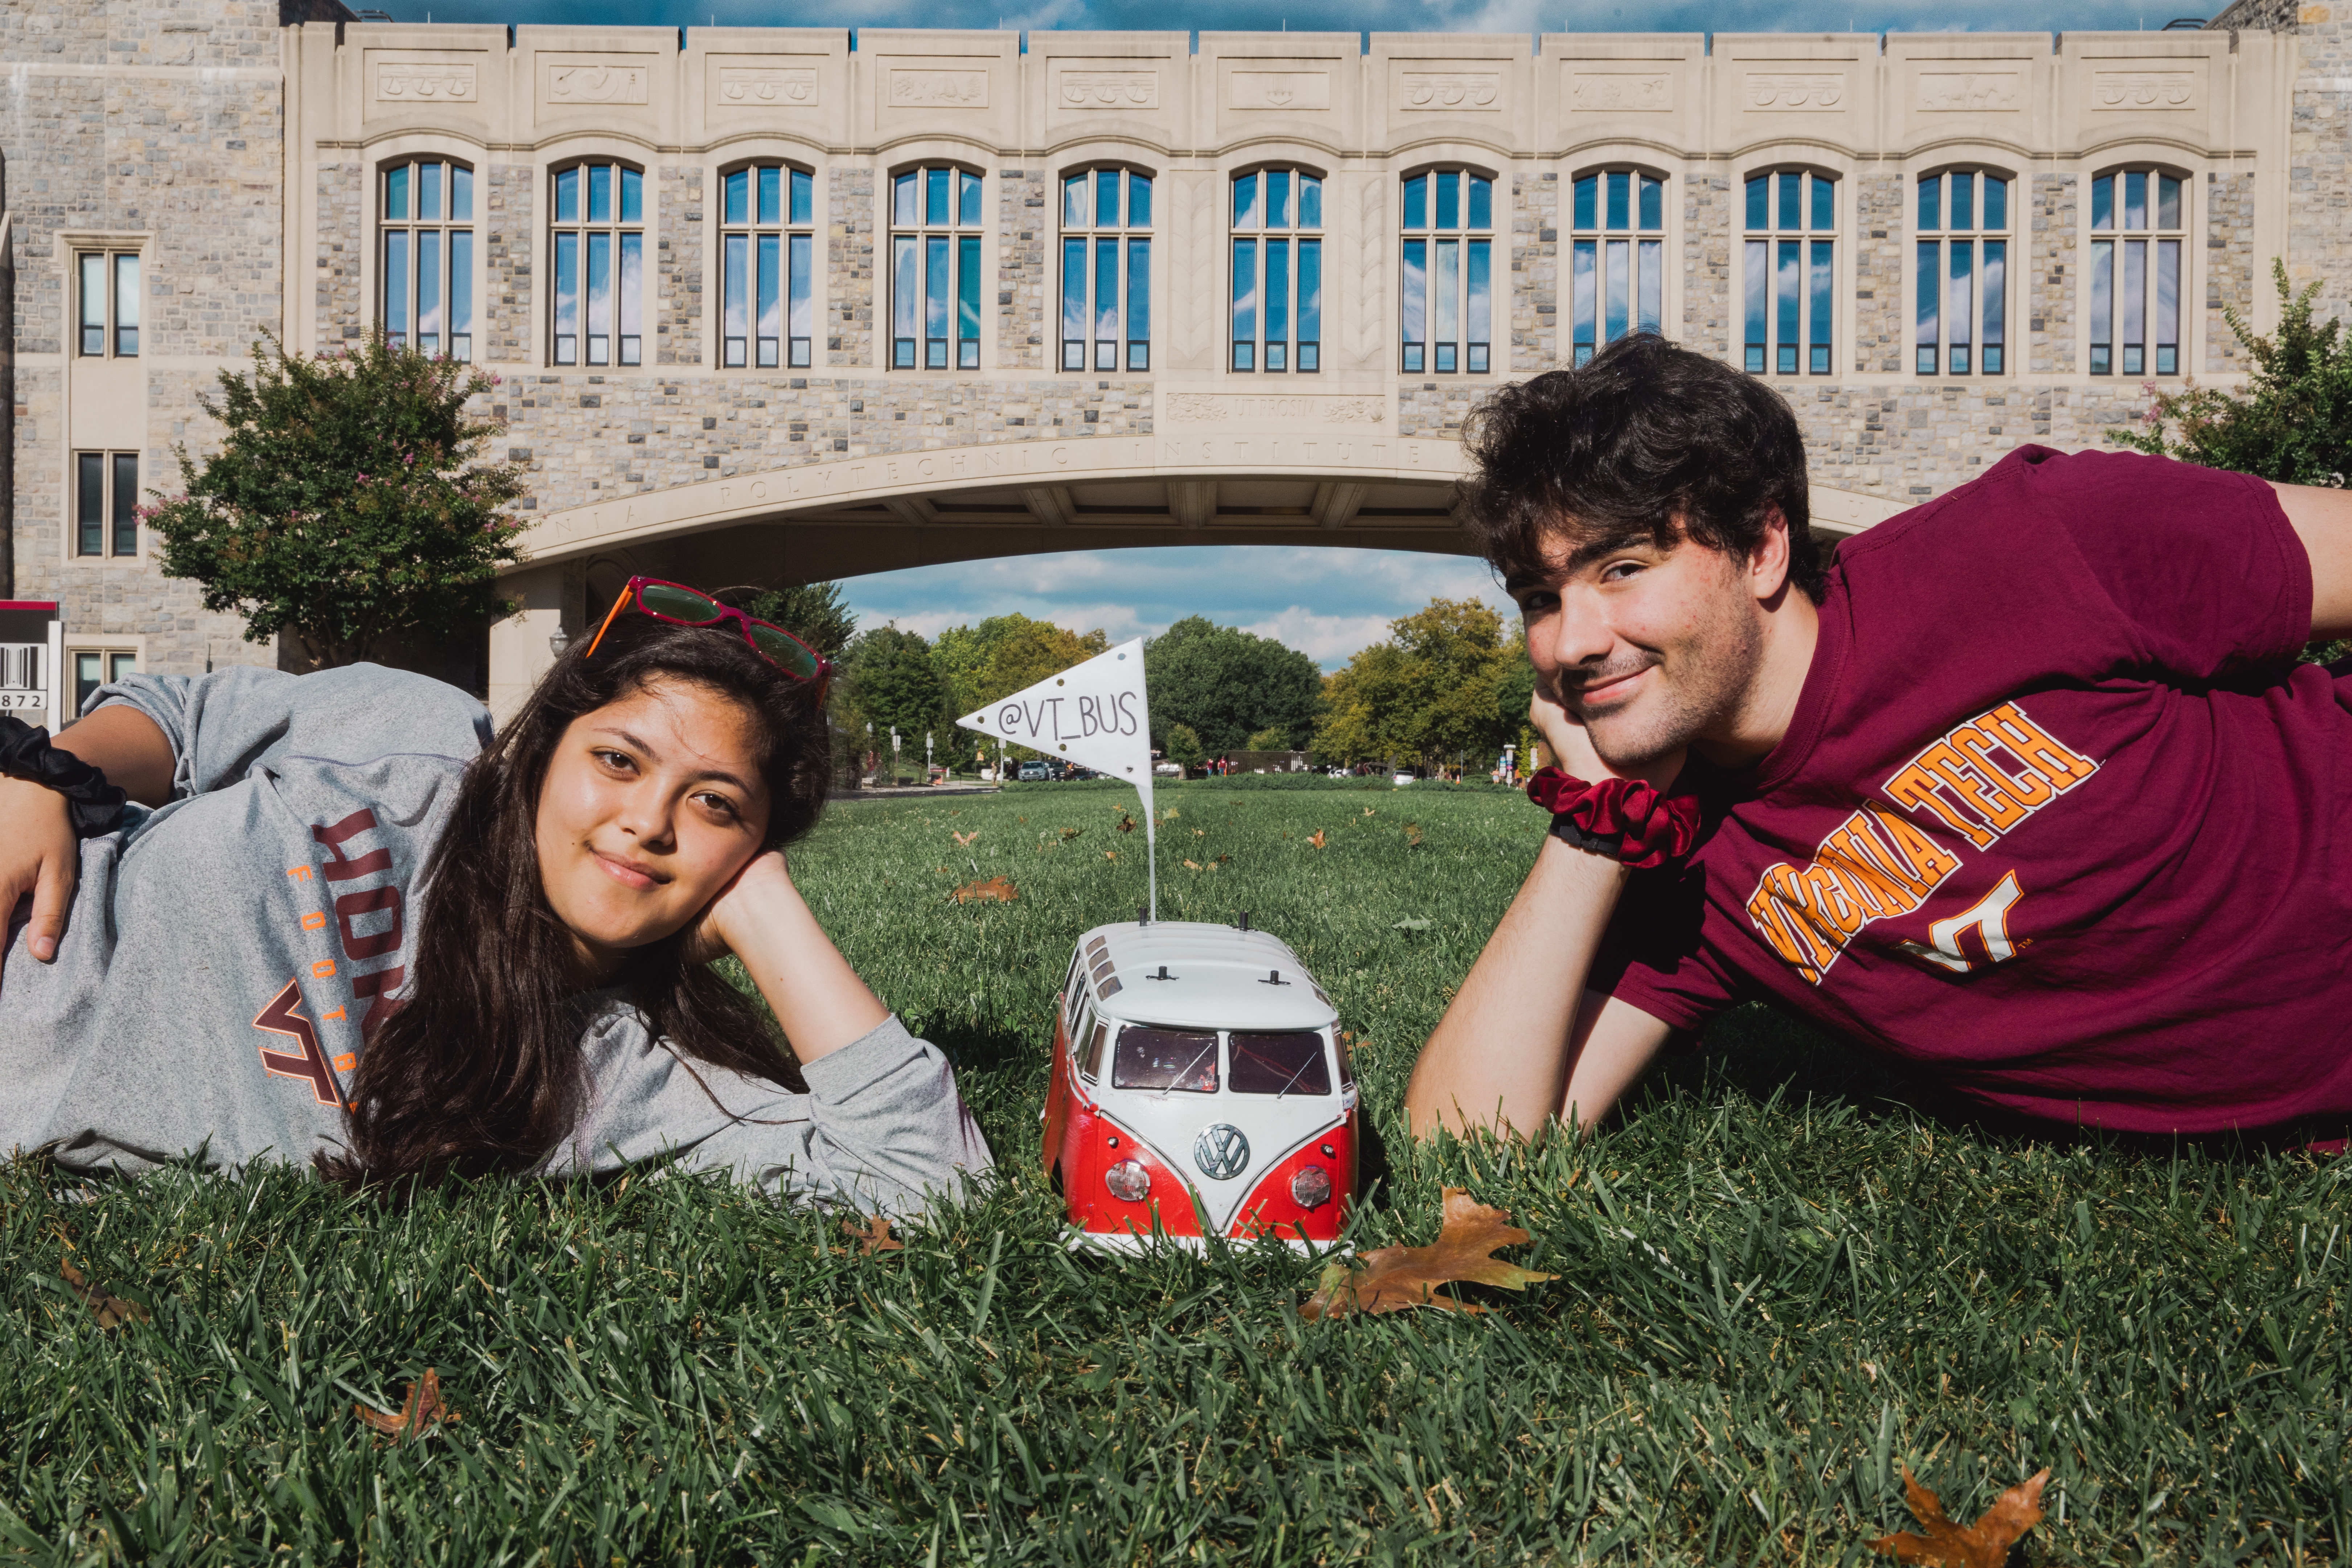 Two students lay in the grass with their heads in their hands, beside their remote-controlled Volkswagen bus. The bus is white and red and has a small flag on top.